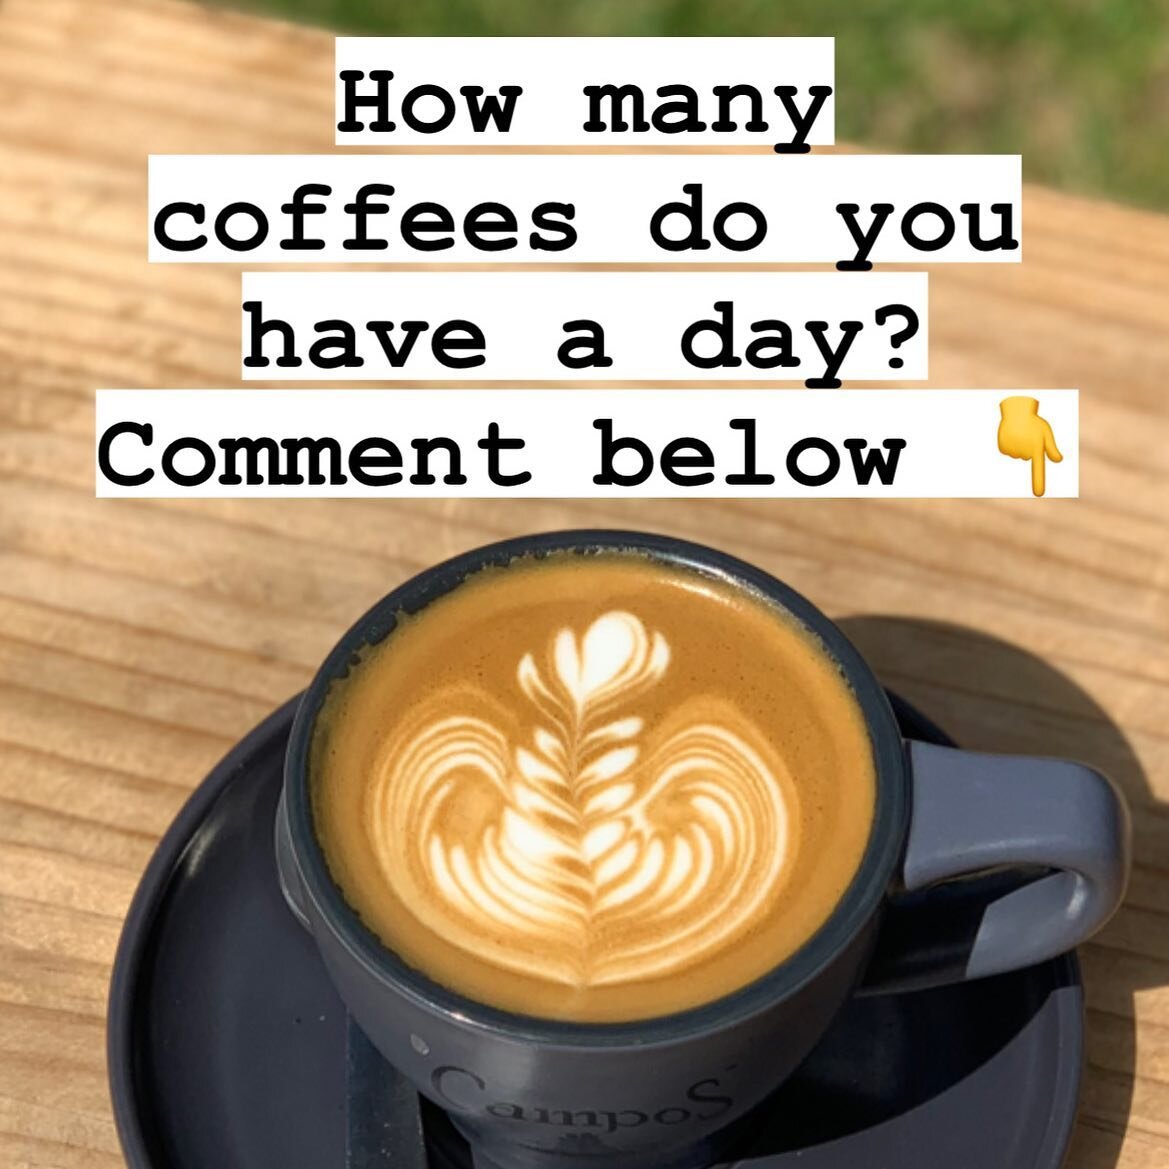 We&rsquo;re interested to hear how many you guys have! 

Anywhere between 1 and 8 is fine 😂

#shellharbour #shellharbourvillage #wollongong #calderwoodvalley #specialtycoffee #coffee #visitnsw #camposcoffee #campos #beanroasted #riverinamilk #single